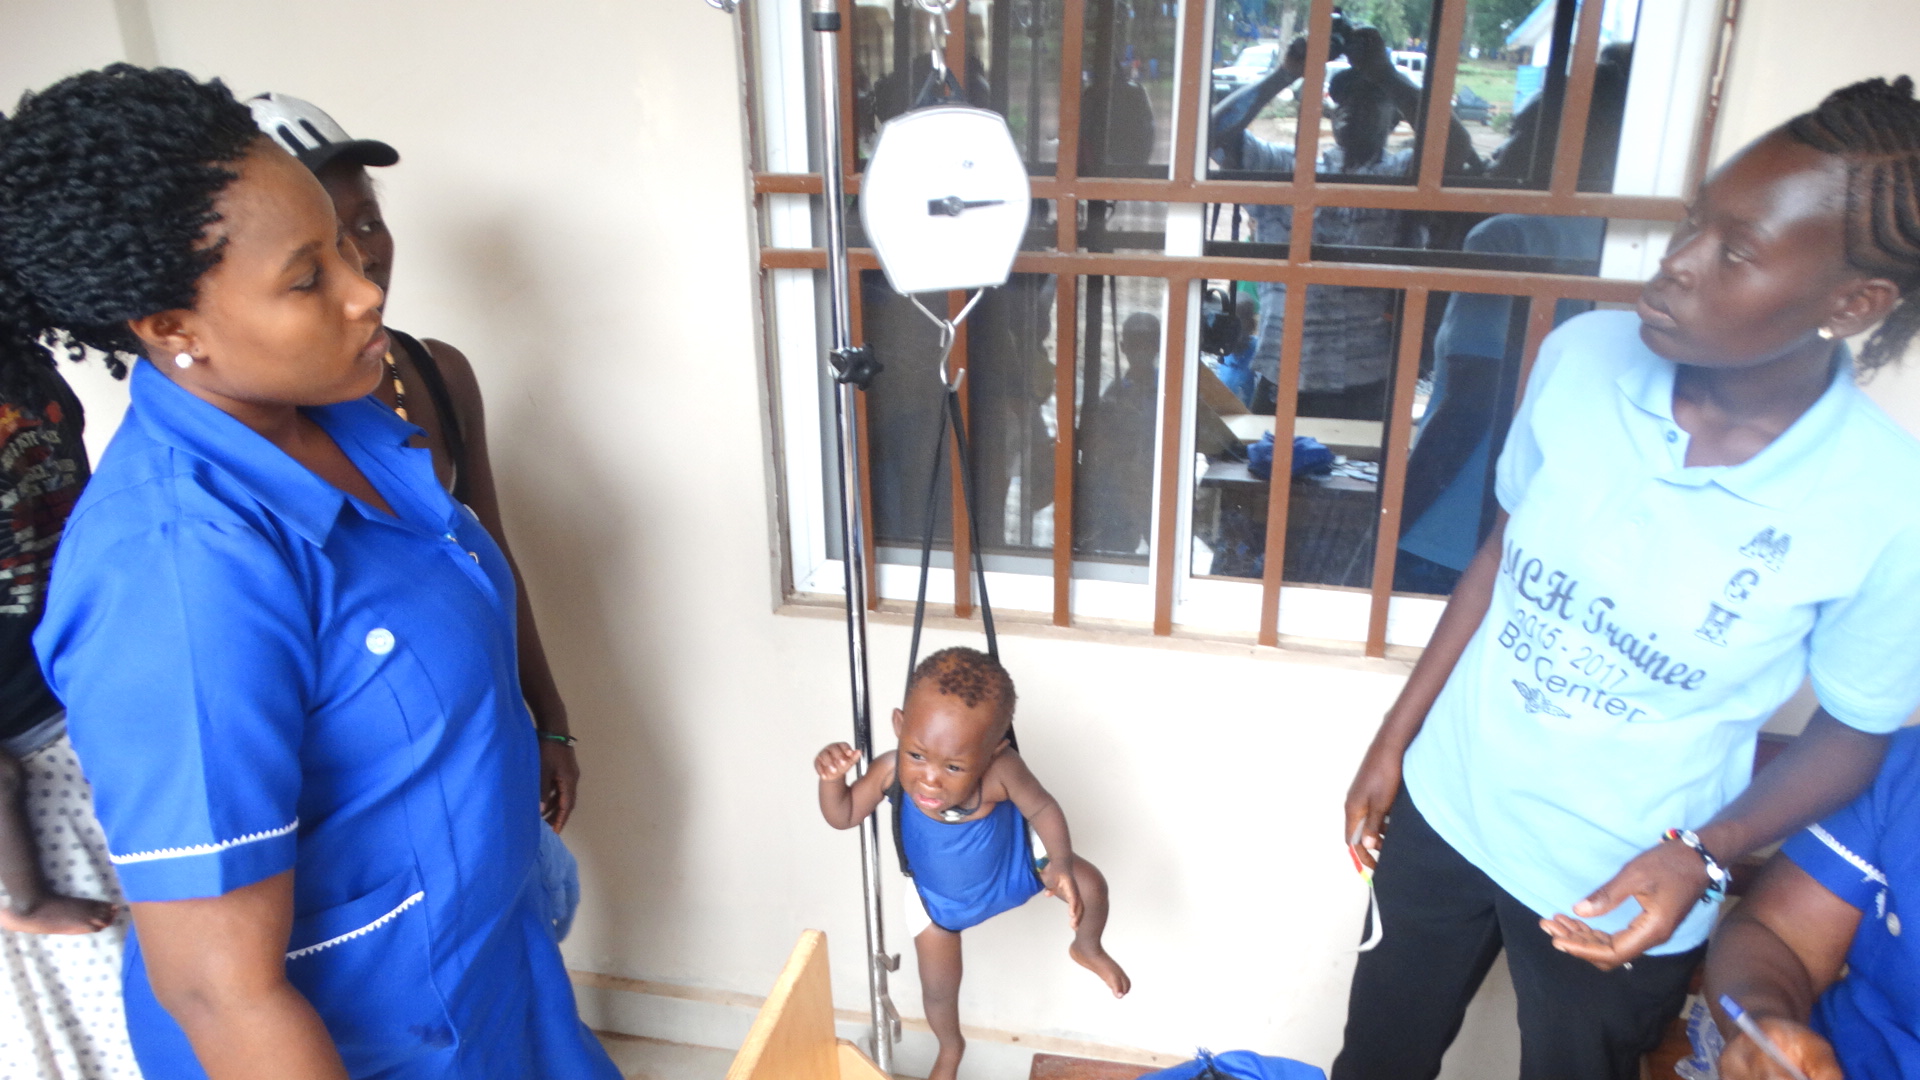 Staff at United Methodist Mercy Hospital in Bo, Sierra Leone, weigh a child during one of the hospital’s outreach days on the hospital grounds. Photo by Phileas Jusu, UMNS.